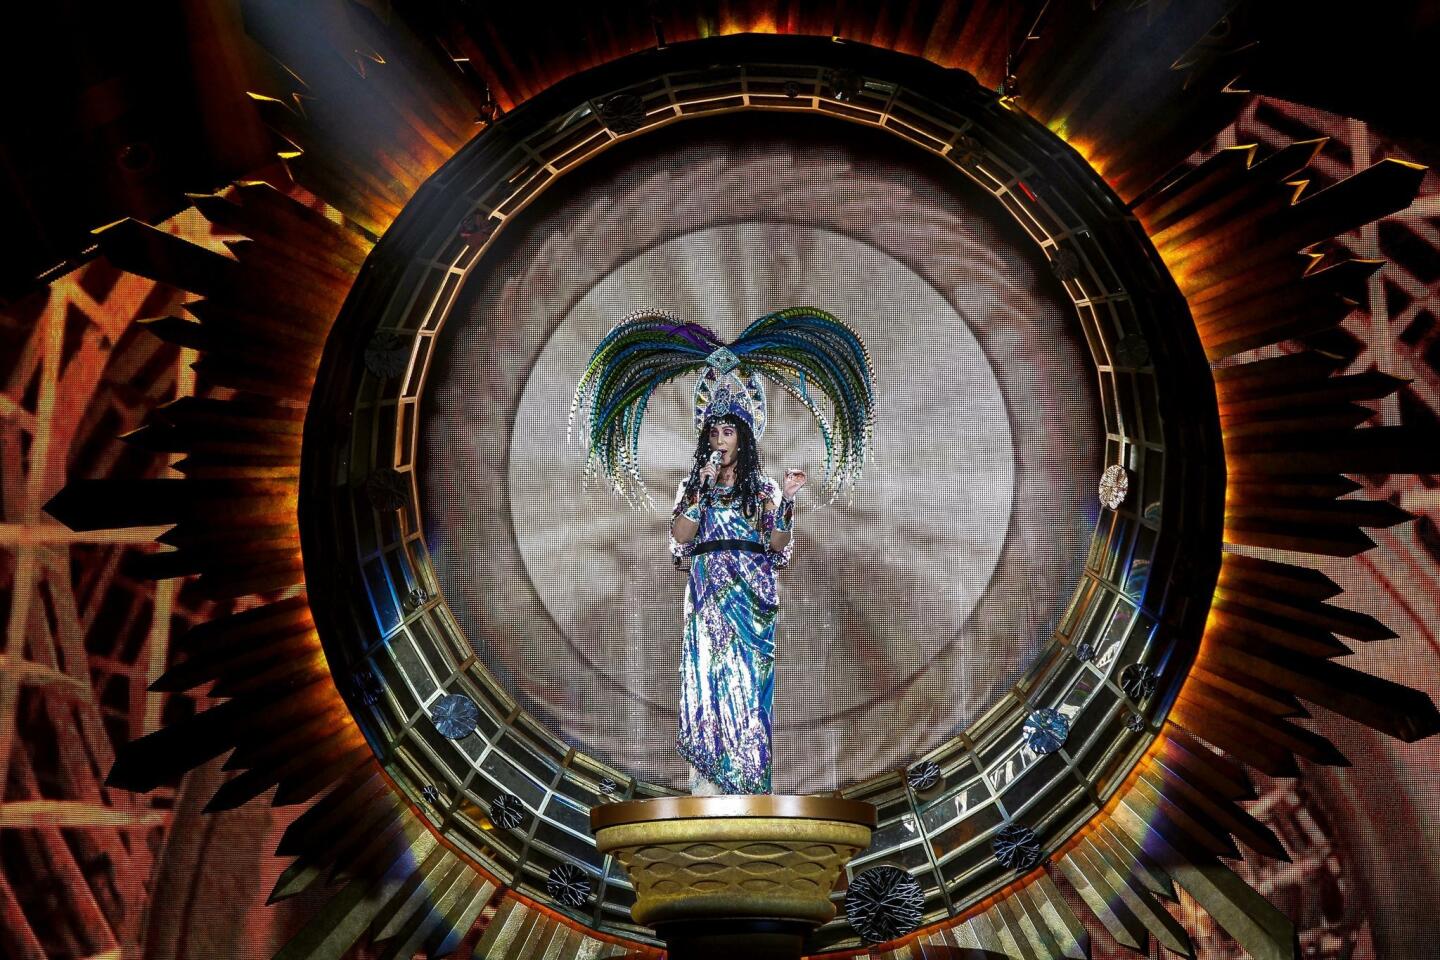 Cher performs during her D2K Tour at the Valley View Casino Center on Friday, July 11, 2014.